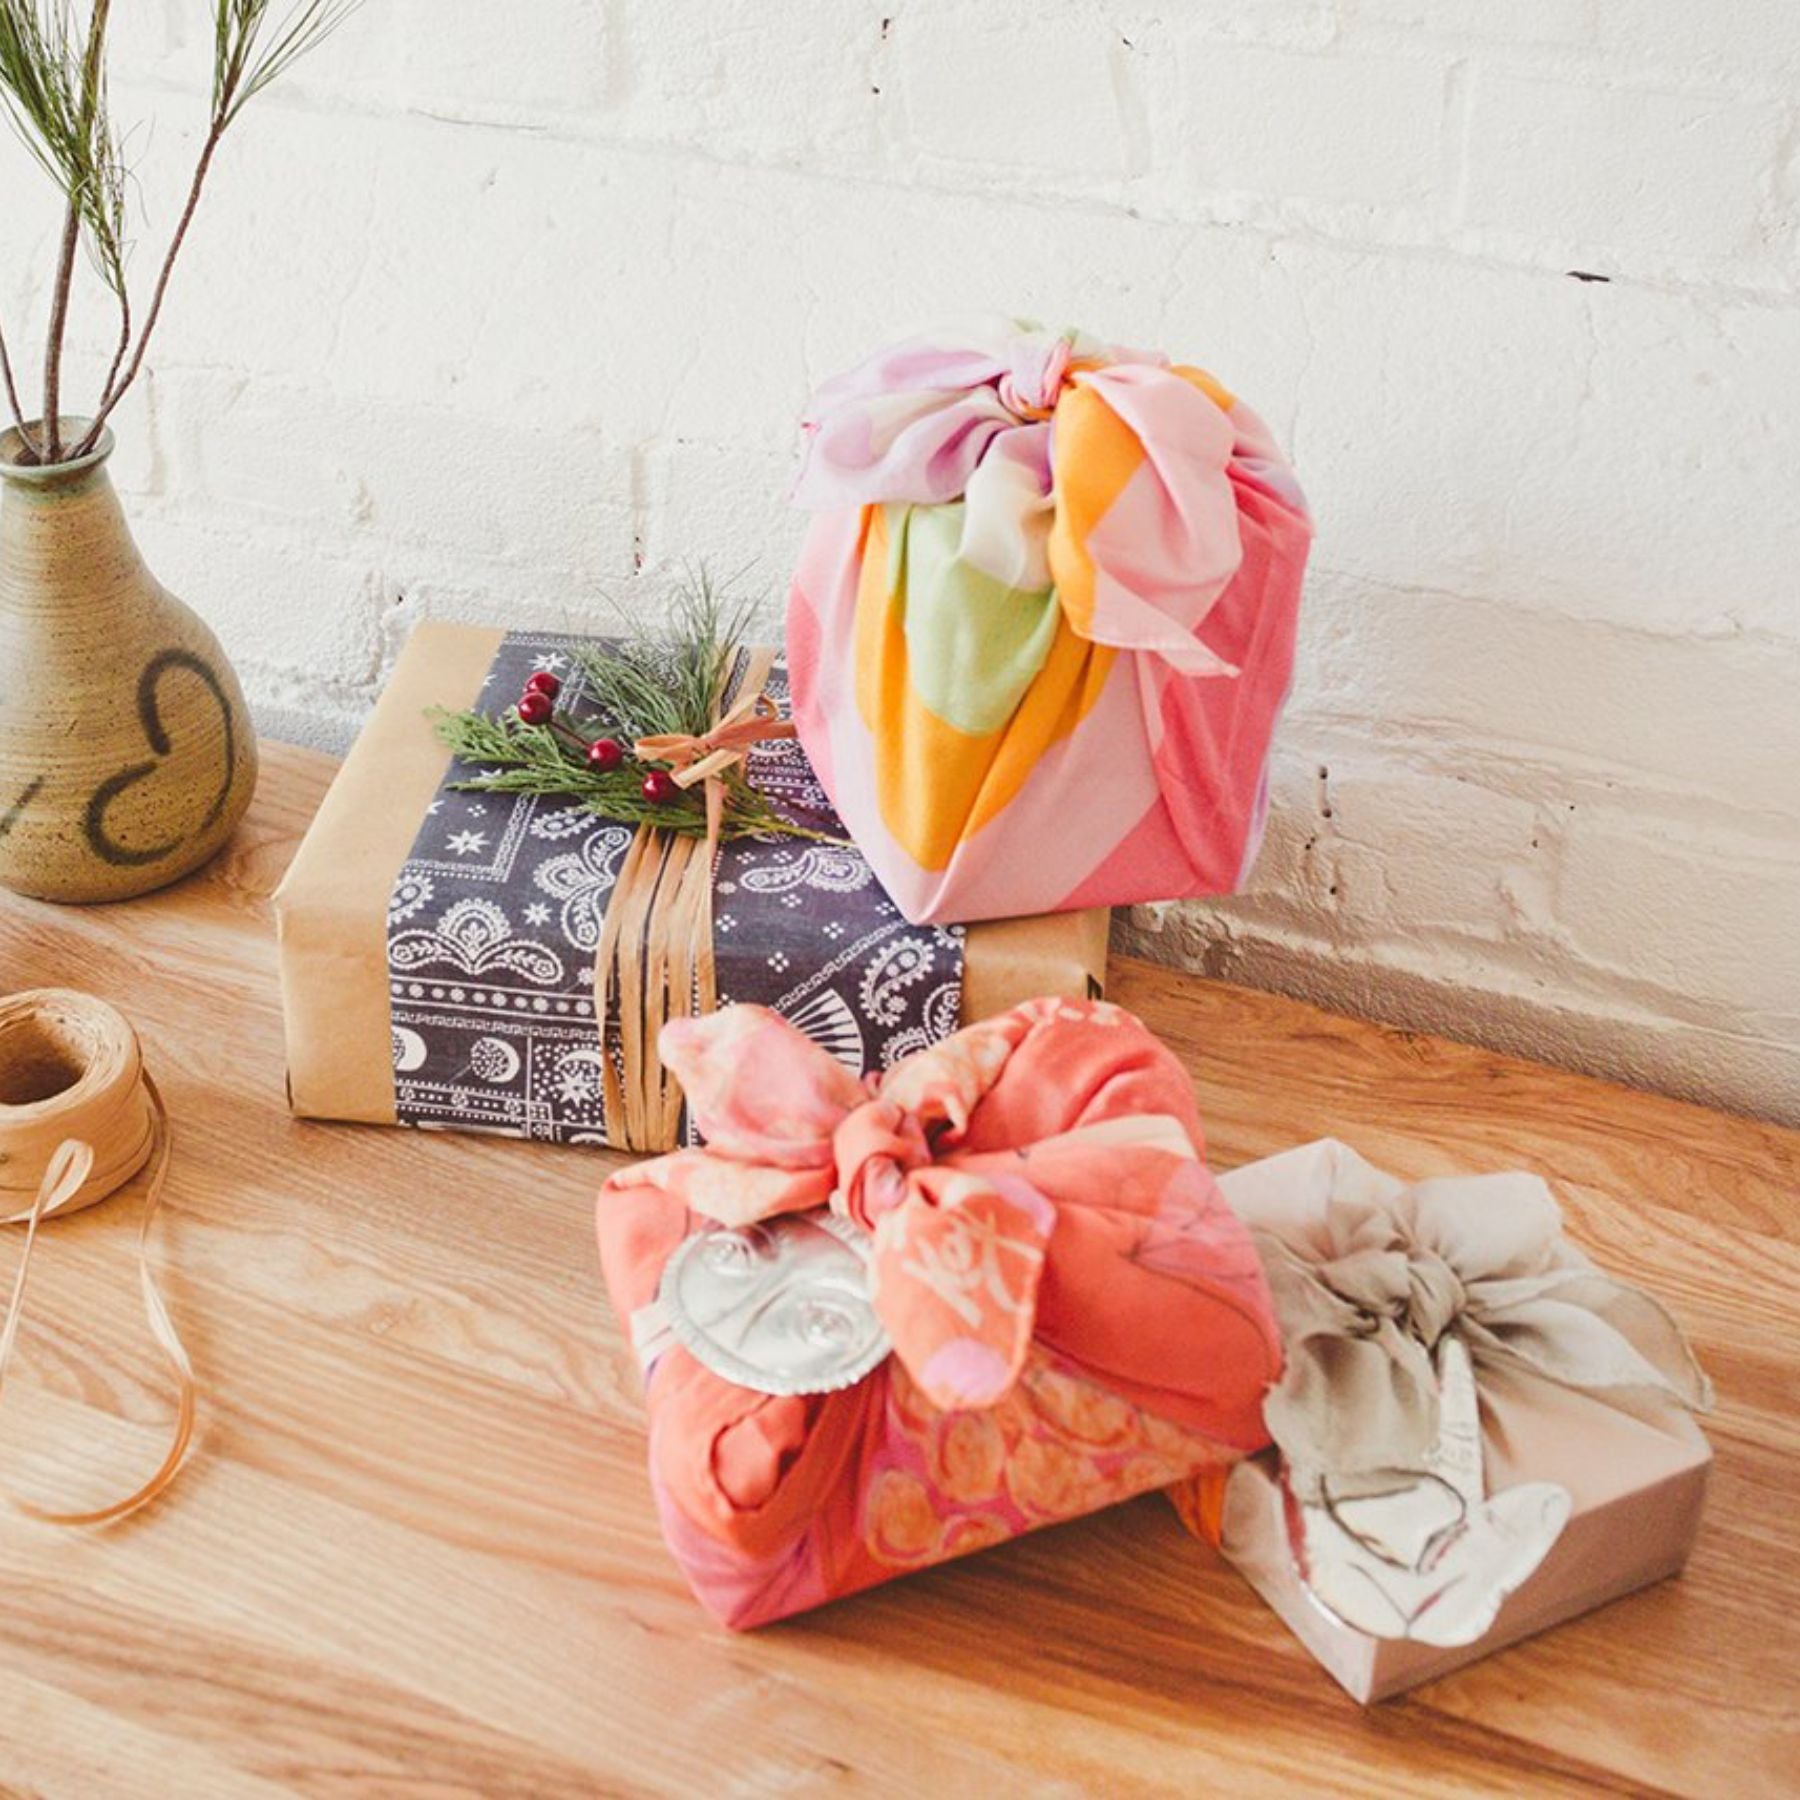 wrap gifts using different fabrics and paper for a unique touch and reusability